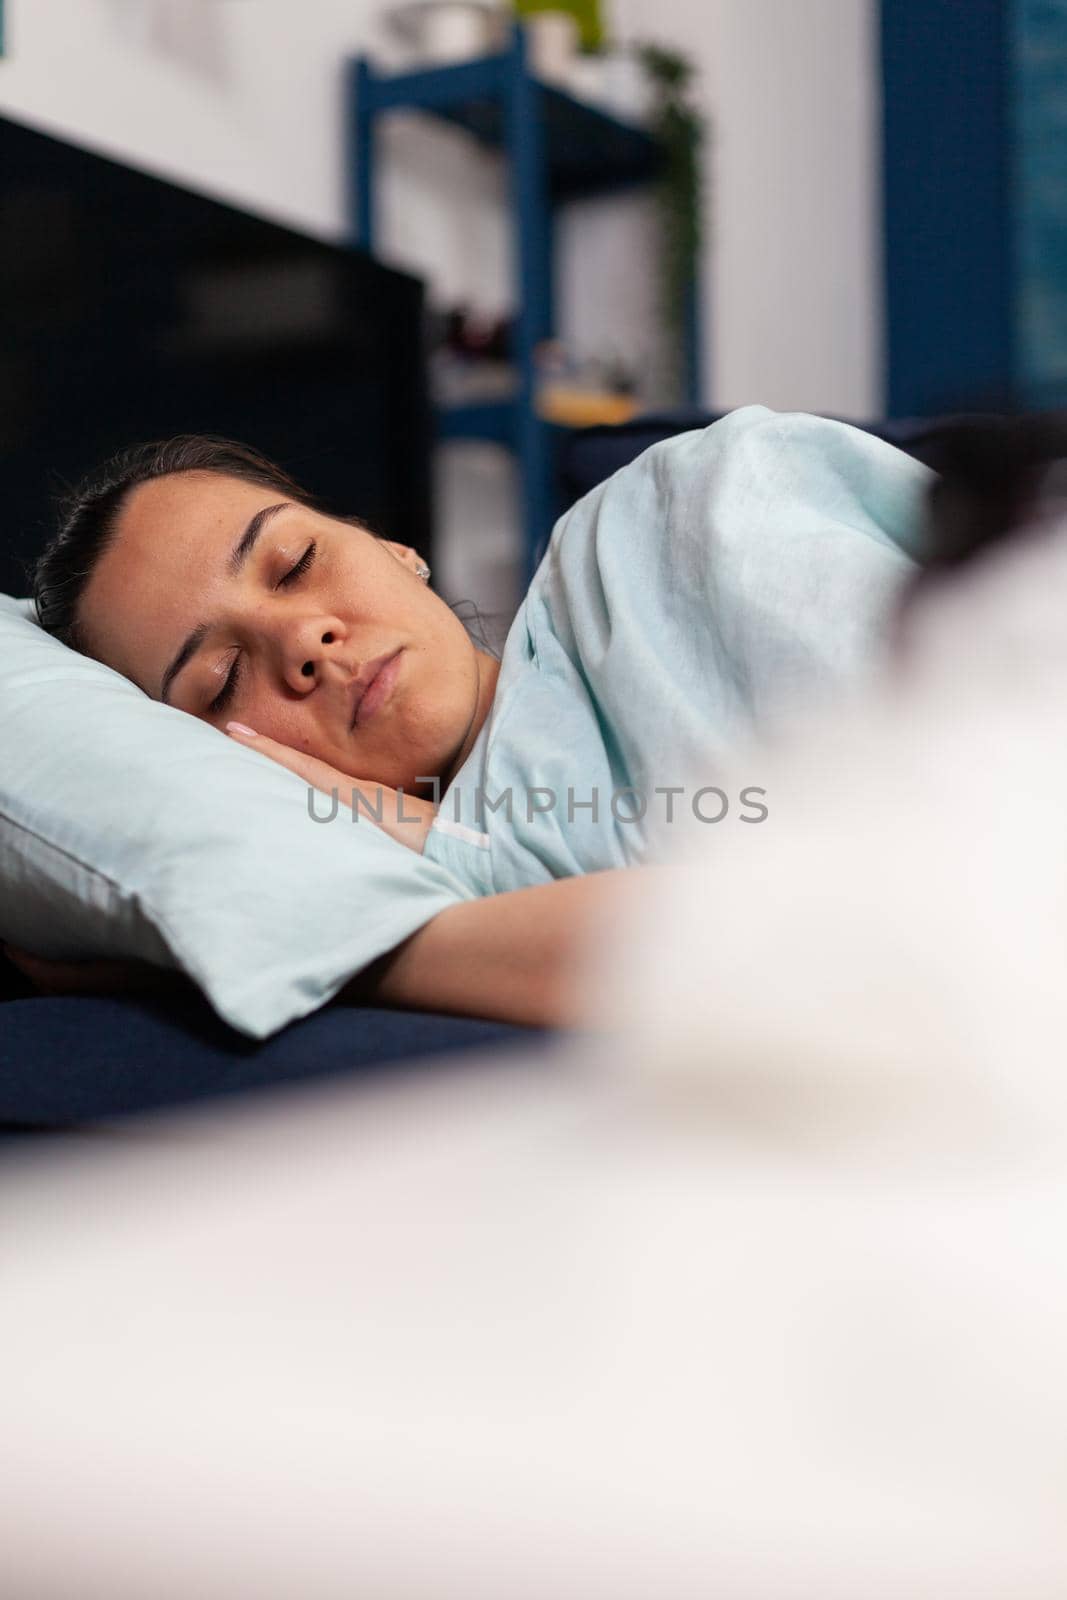 Woman feeling sick sleeping at home on the couch, recovering after cold and flu symptoms. Having fever and taking medicine treatment while resting in bedroom after seasonal disease